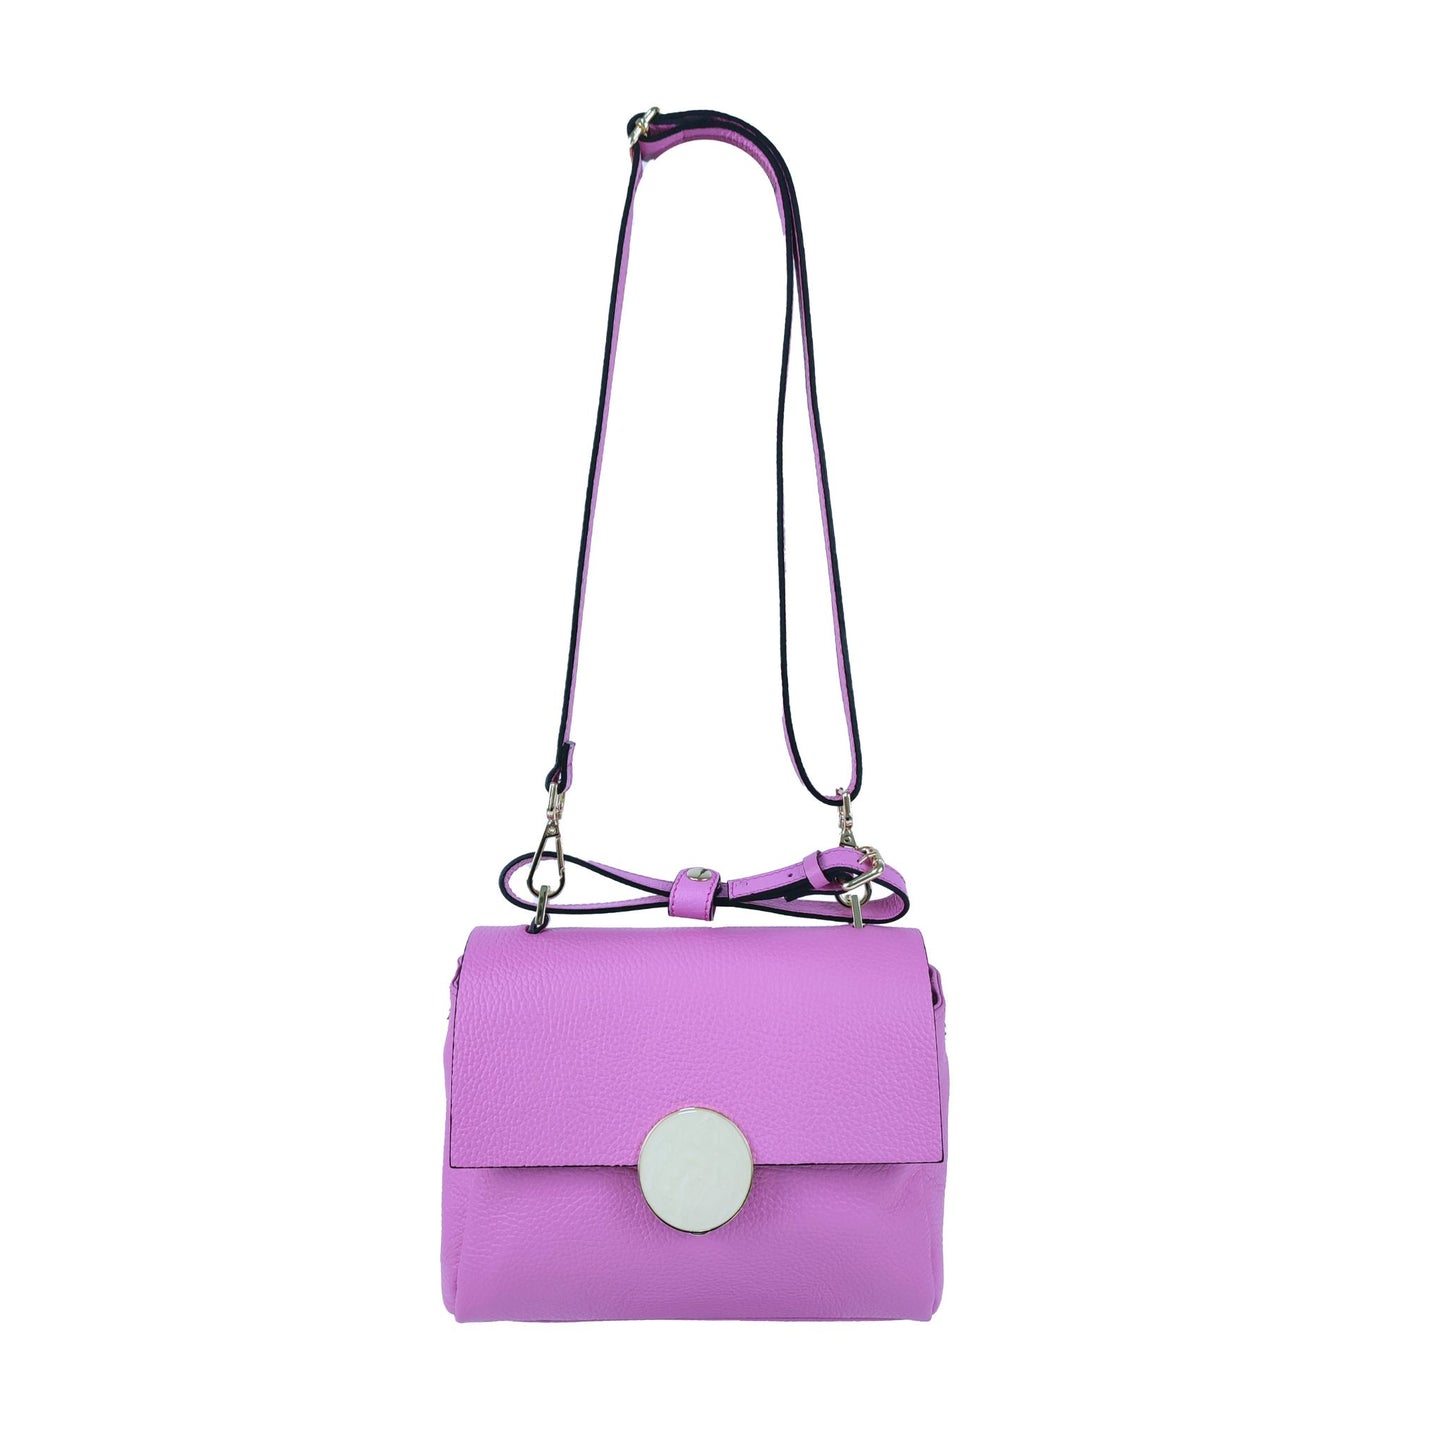 The Pink Leather handheld bag